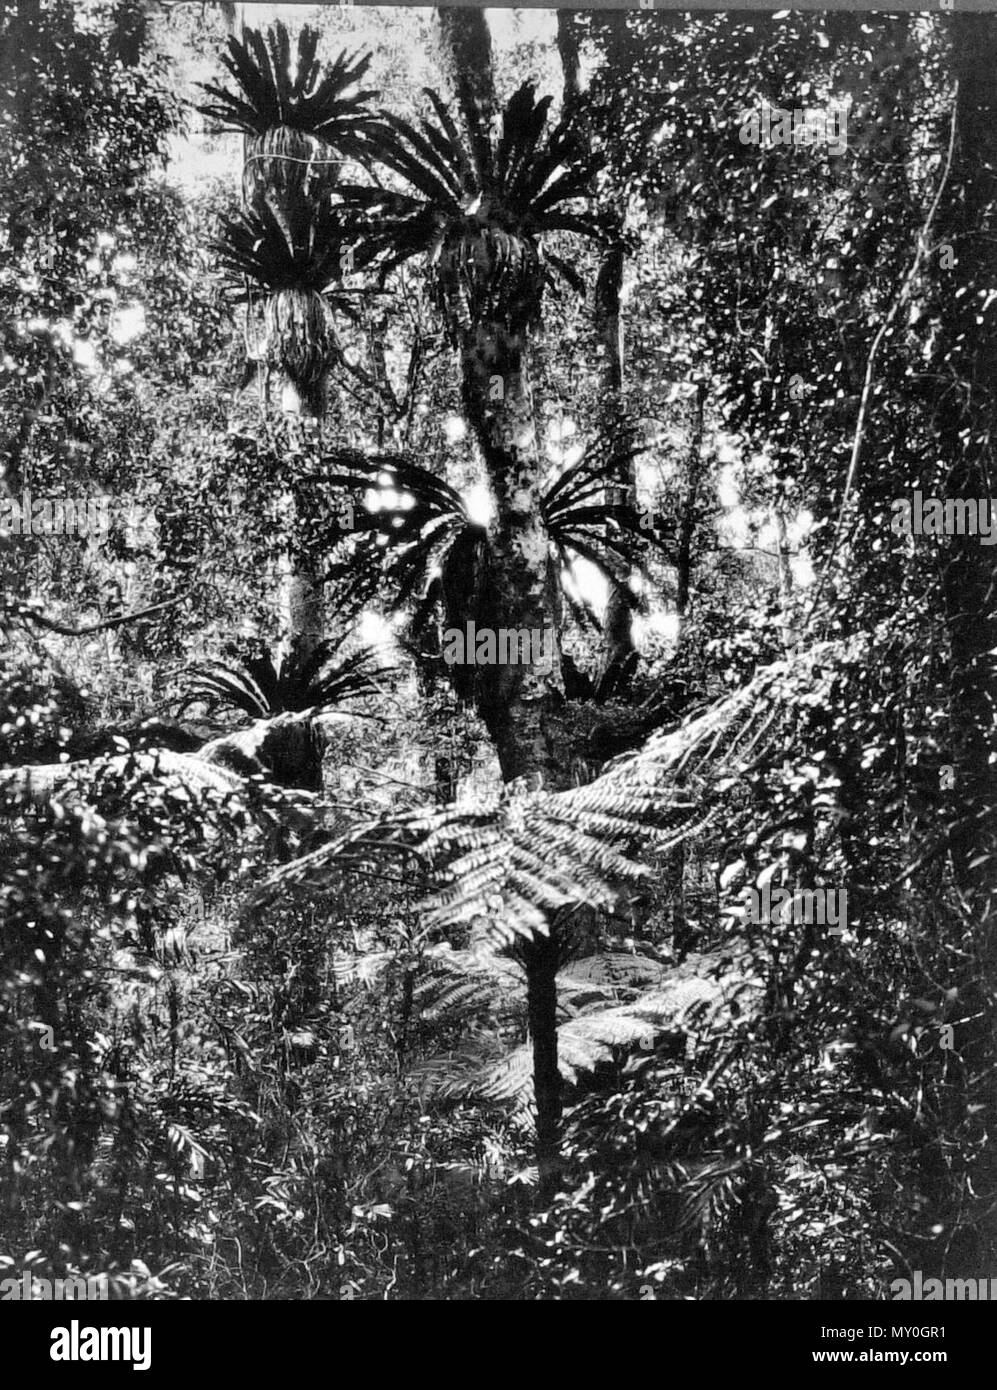 Bush land, Lamington National Park, Beaudesert Shire, September 1933. LAMINGTON NATIONAL PARK  No Removal Of Timber 36721618?searchTerm=lamington national park&amp;searchLimits=l-state=Queensland|||l-word=100+-+1000+Words )   The removal of timber from Lamington National Park will not be tolerated on any account, said the Minister for Transport (Mr. J. Dash), who supervises the Tourist Branch, yesterday.   Mr. Dash received this assurance after personal representations to the Lands Department. The Director of Forests (Mr. V. Grenning) had advised the Minister for Lands that although several ap Stock Photo